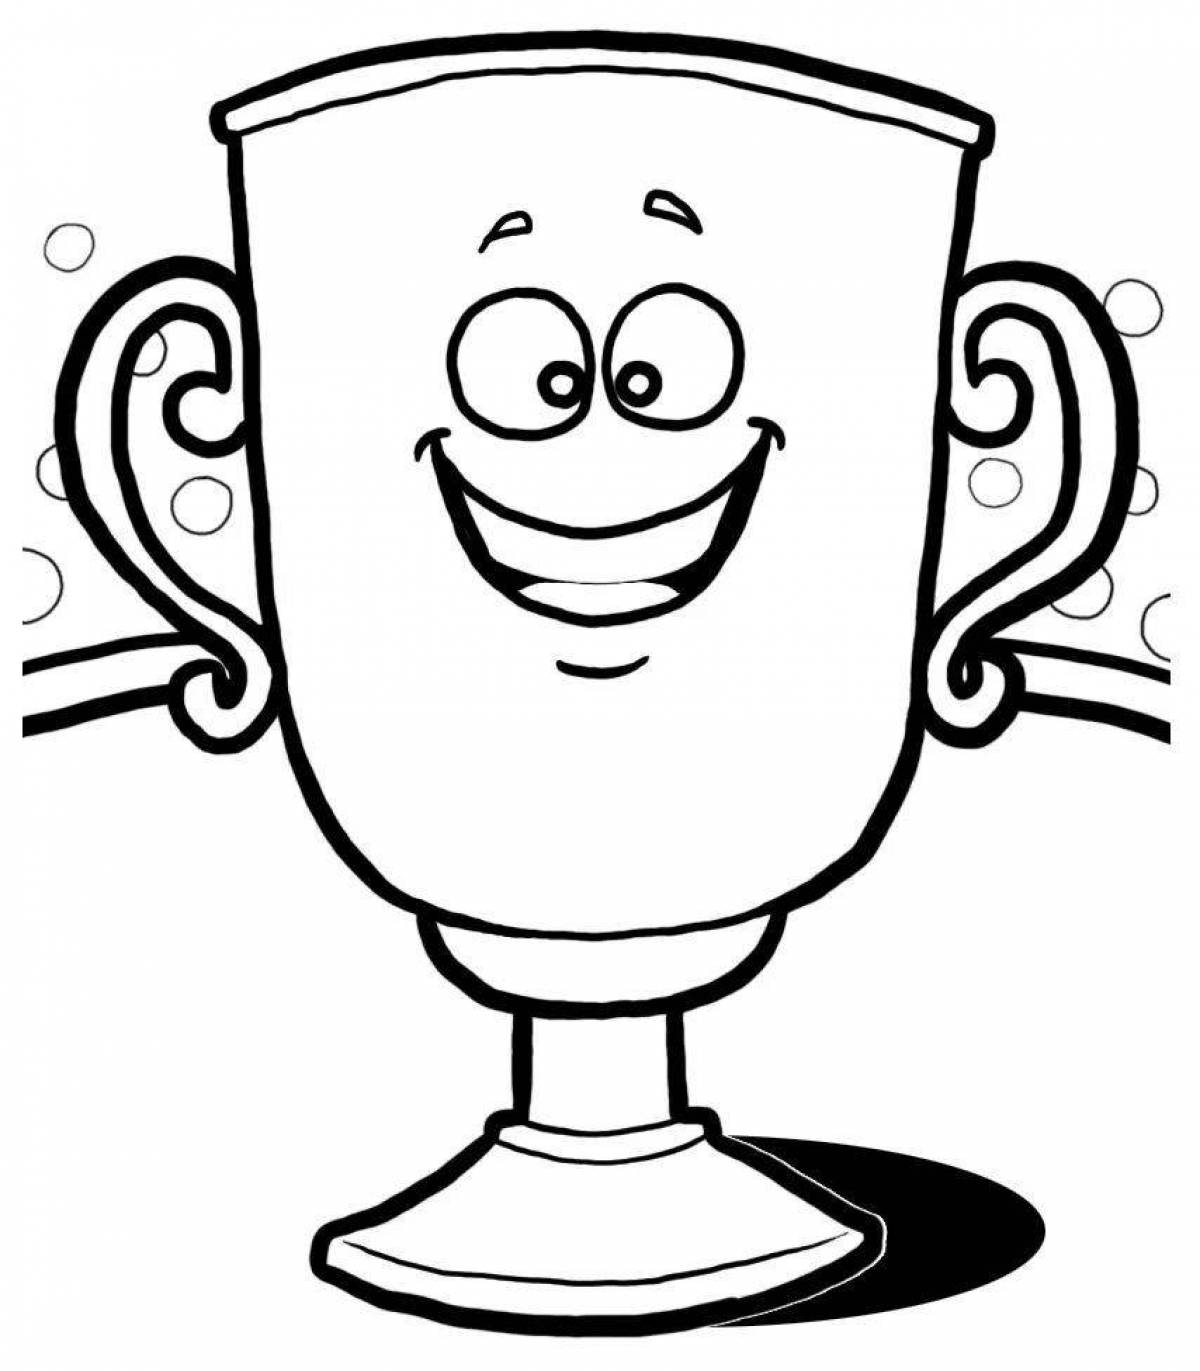 Coloring book shining winner's cup